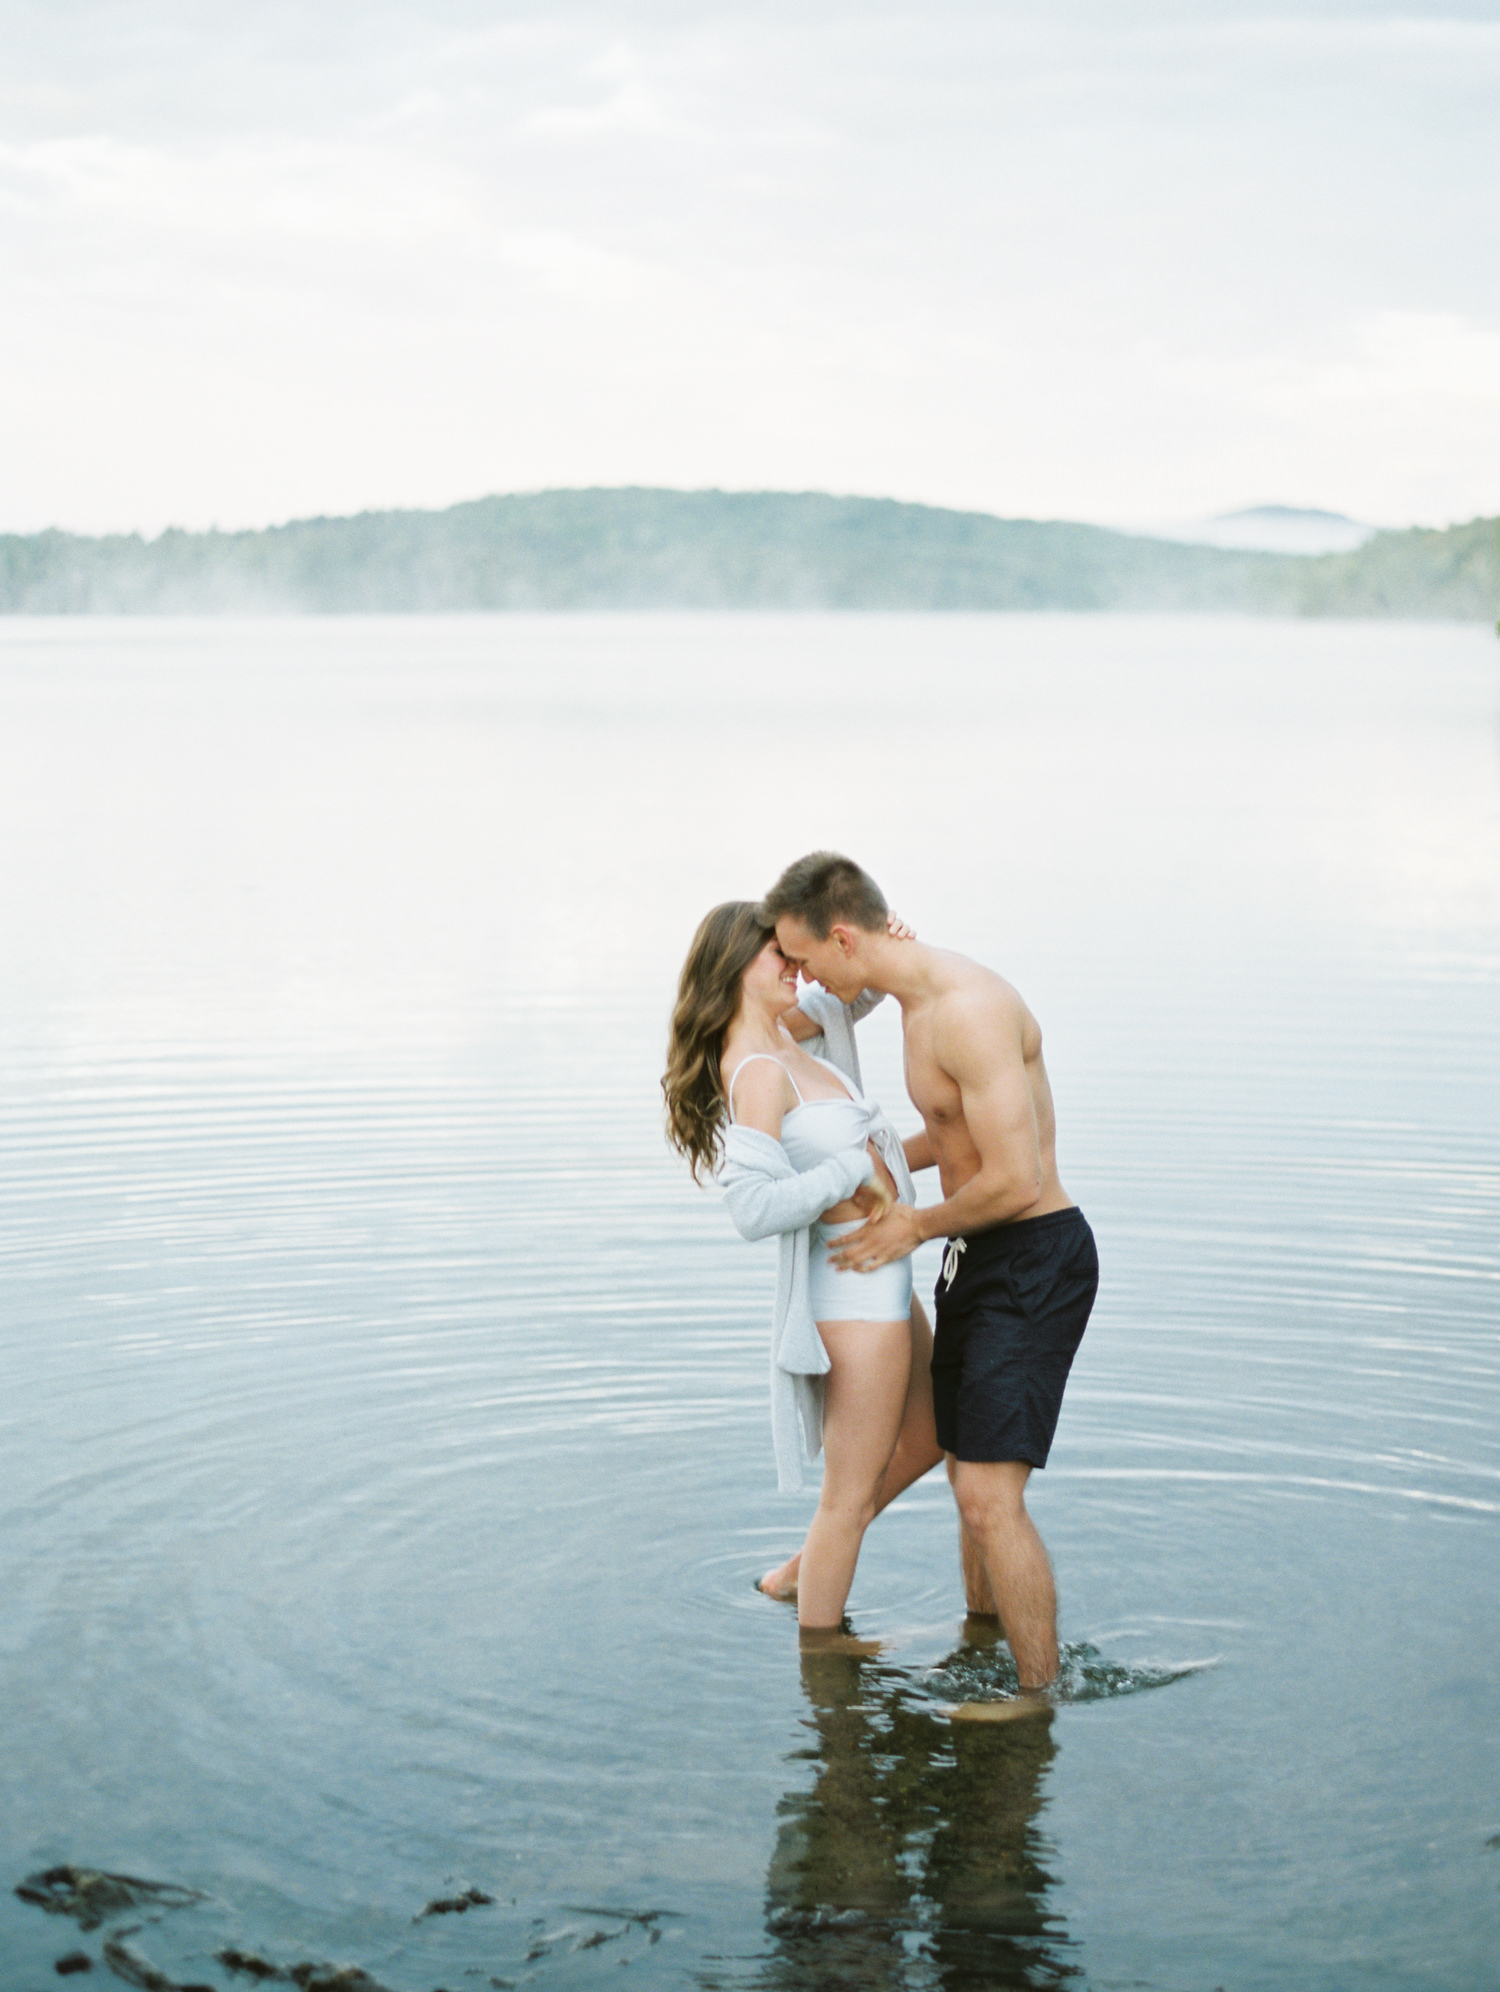 couples stands and kisses in water in Adirondacks Old Forge, Lake Placid, Saranac Lake, Keene adventure Mary Dougherty